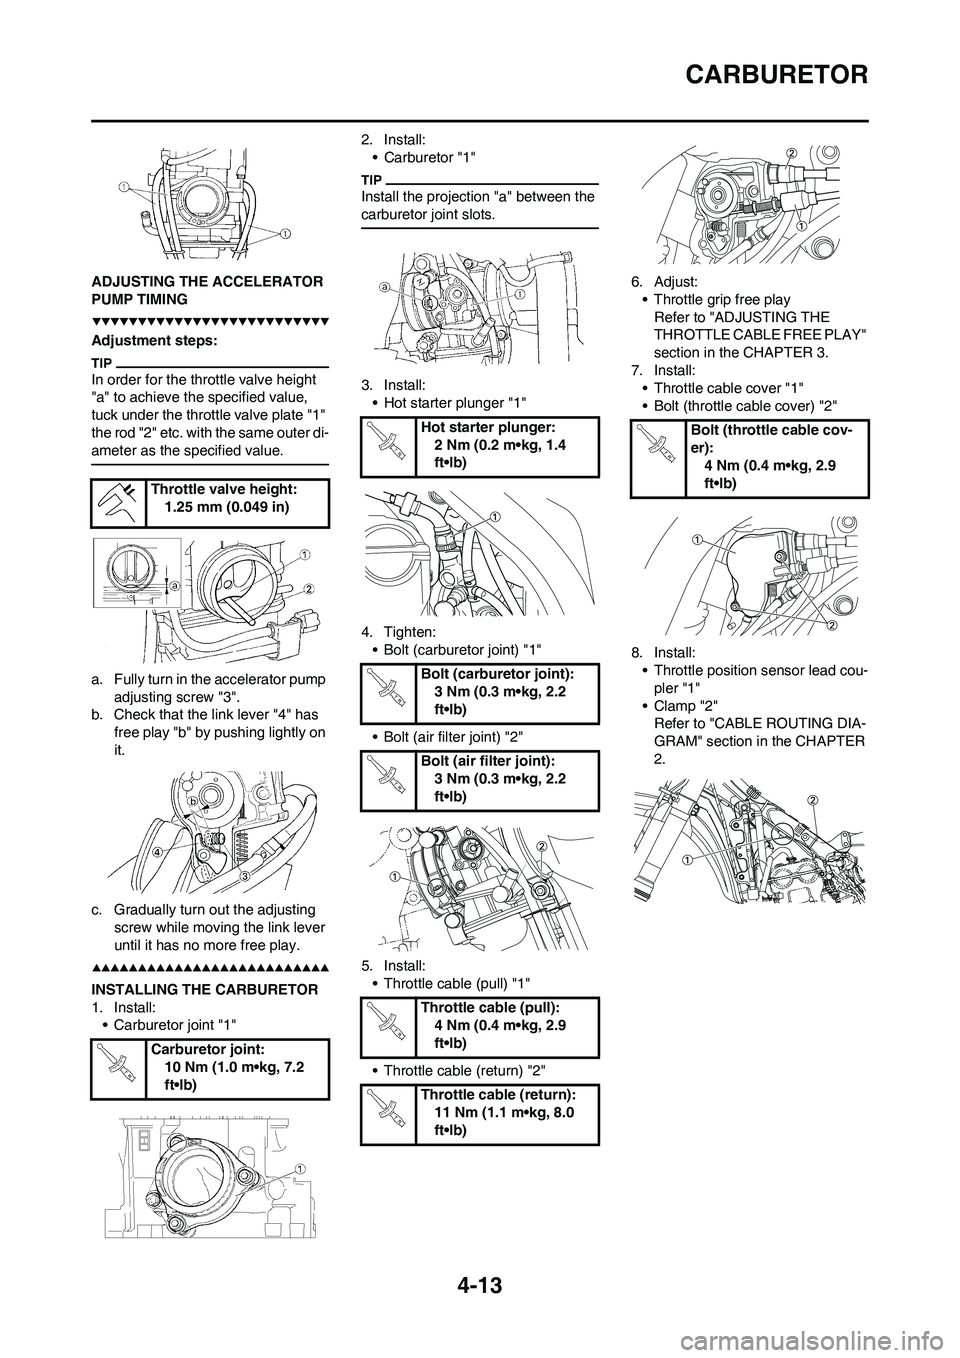 YAMAHA YZ450F 2009  Owners Manual 4-13
CARBURETOR
ADJUSTING THE ACCELERATOR 
PUMP TIMING
Adjustment steps:
In order for the throttle valve height 
"a" to achieve the specified value, 
tuck under the throttle valve plate "1" 
the rod "